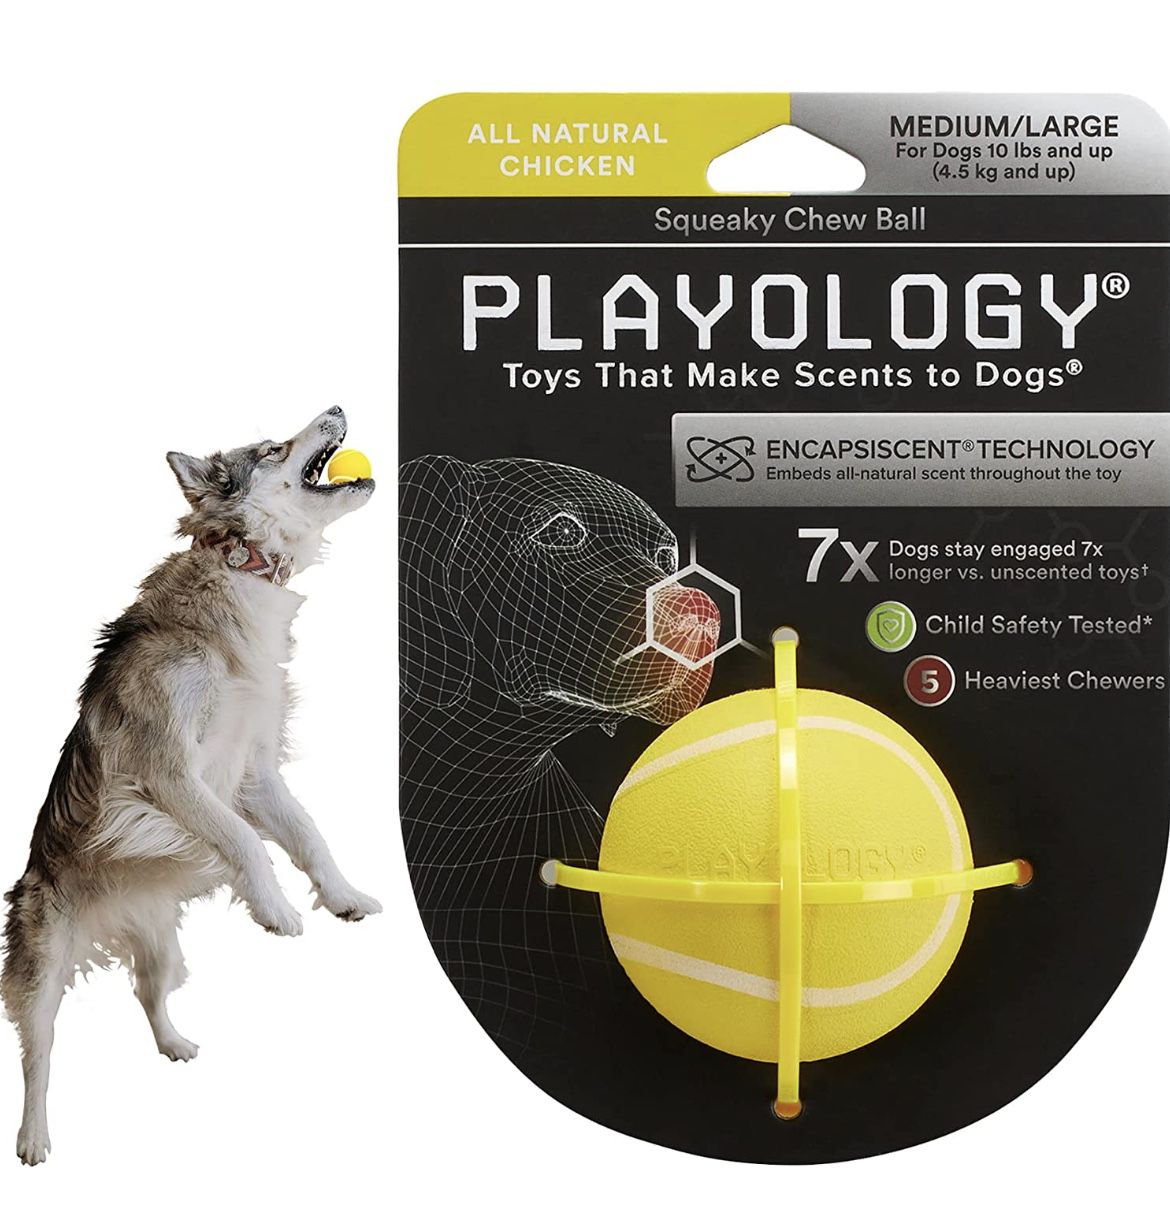 Squeaky Dog Toy - Engaging All-Natural Scented Dog Toys for Small, Medium & Large Dogs - Interactive & Tough Non-Toxic Chew Toys